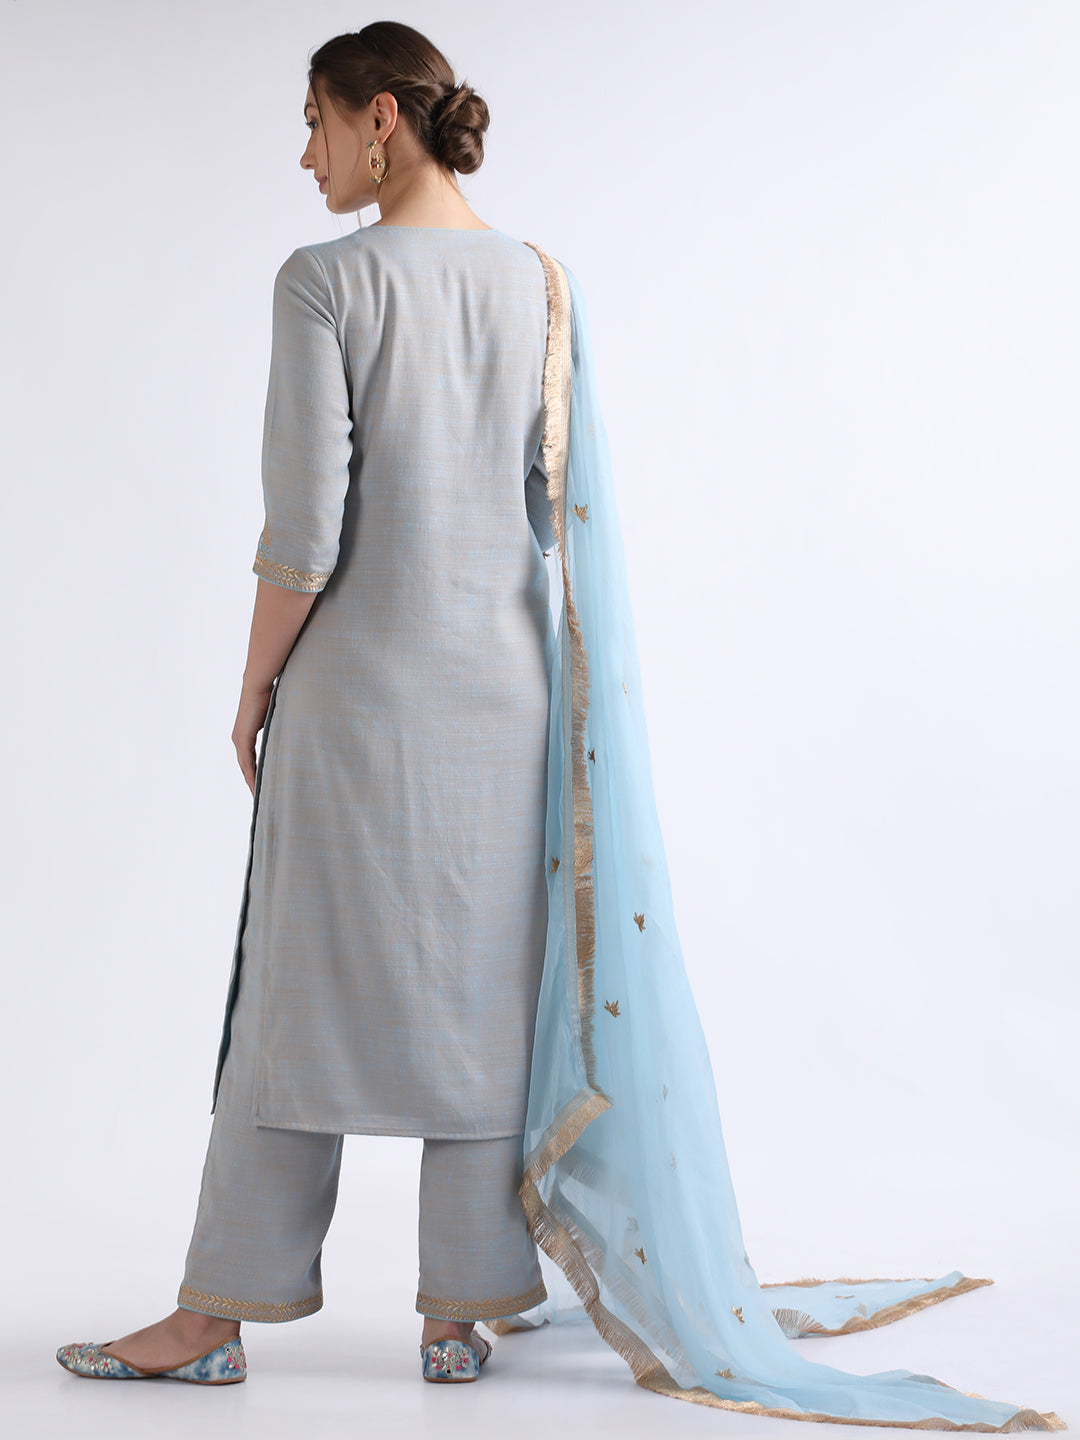 Blue Cotton Relaxed Fit Kurta Set with Dupatta at Kamakhyaa by RoohbyRidhimaa. This item is Blue, Chiffon, Cotton, Dupattas, Embroidered, Festive Wear, Kurta Set with Dupattas, Relaxed Fit, Toxin free, Zari Embroidered